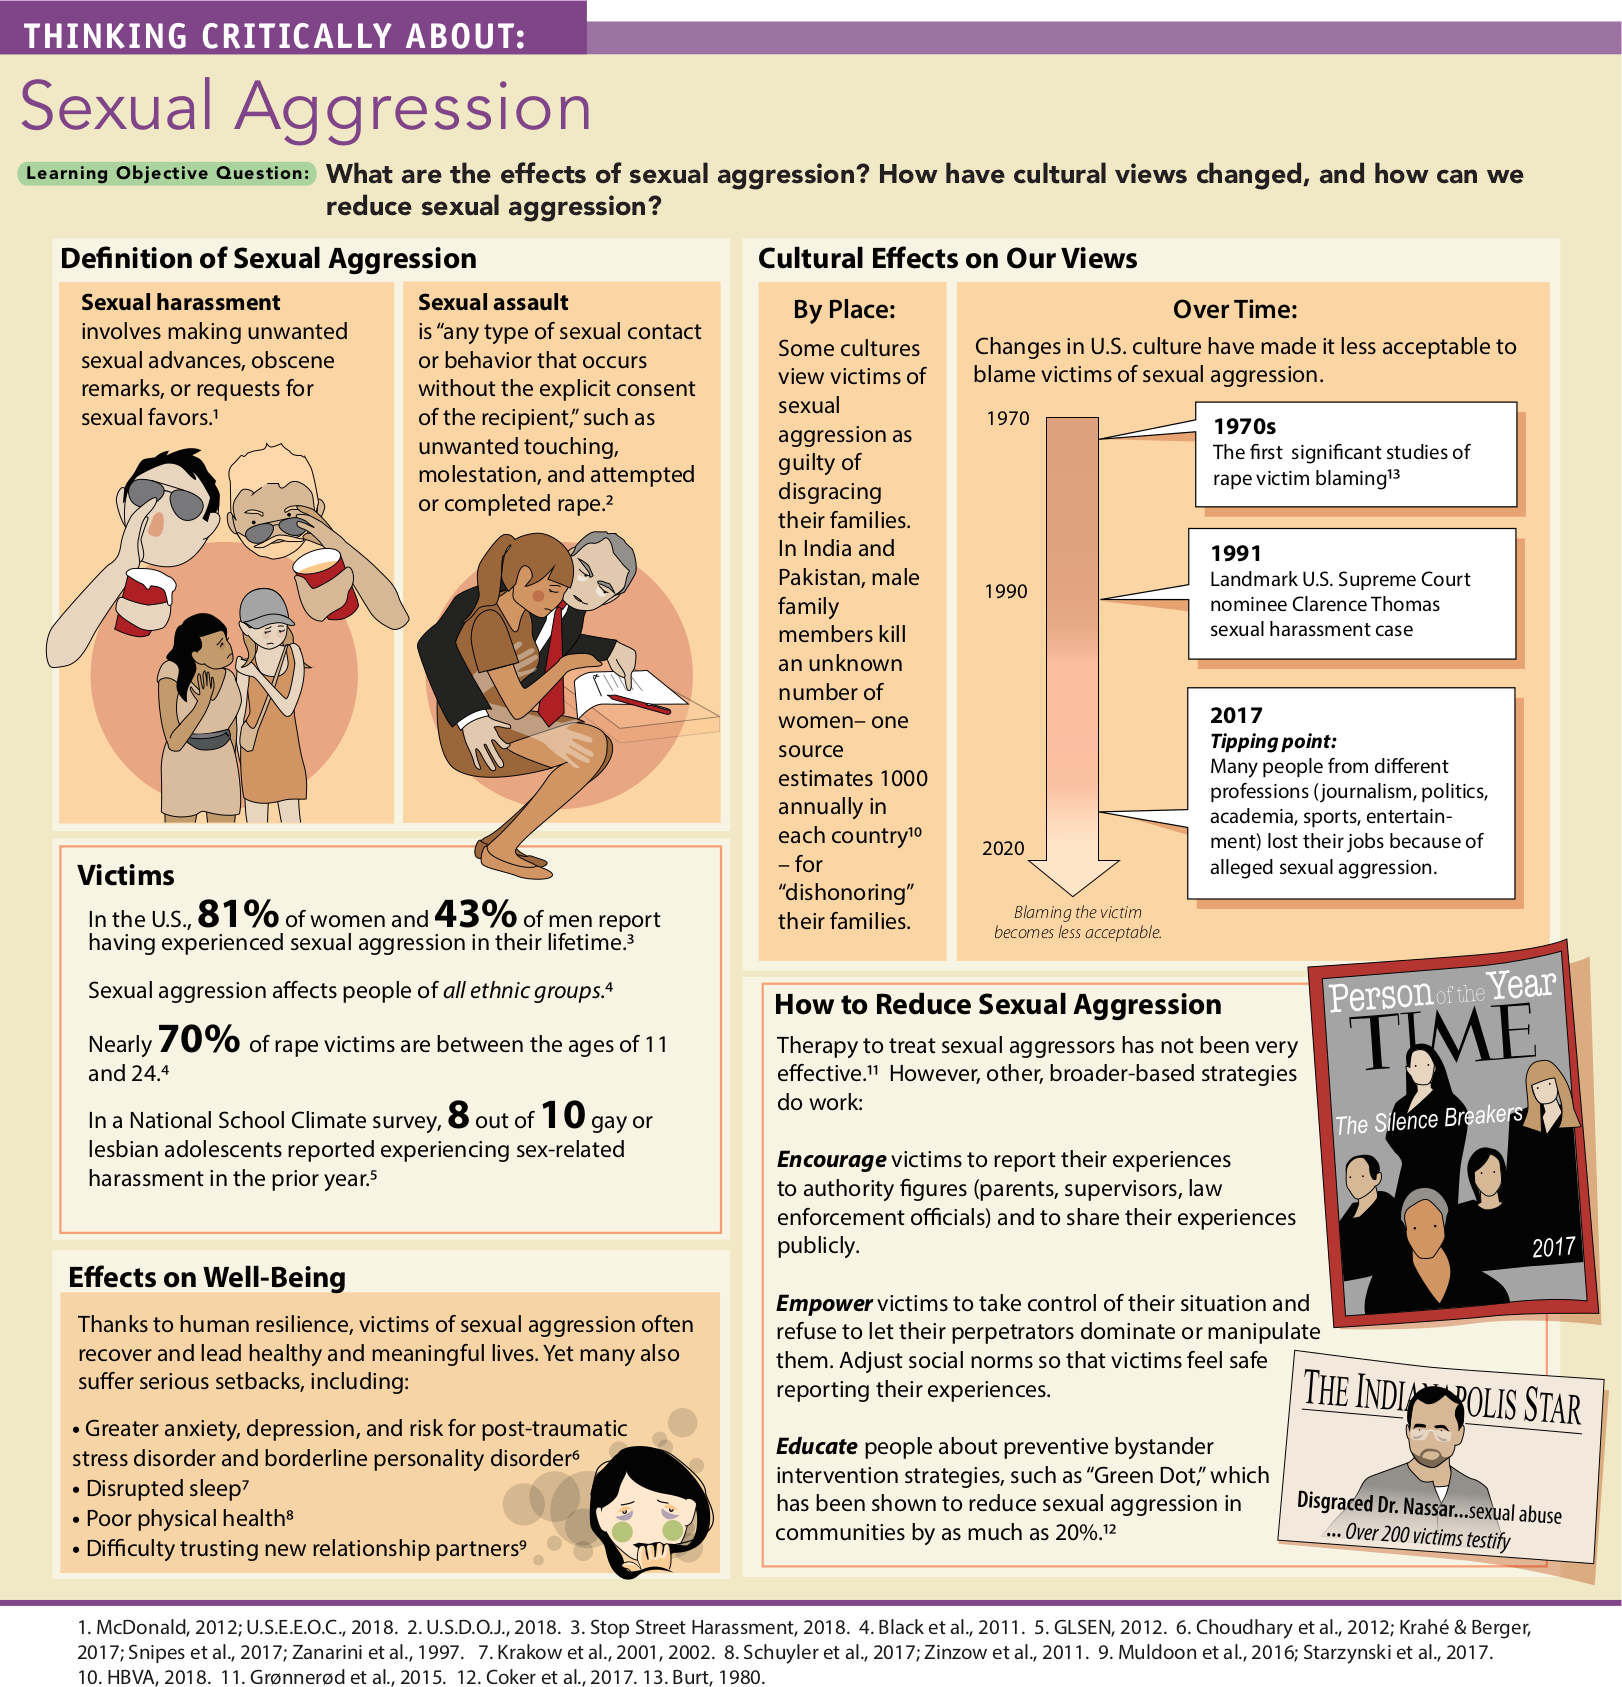 A page describes Sexual Aggression in detail. You can read full description from the link below